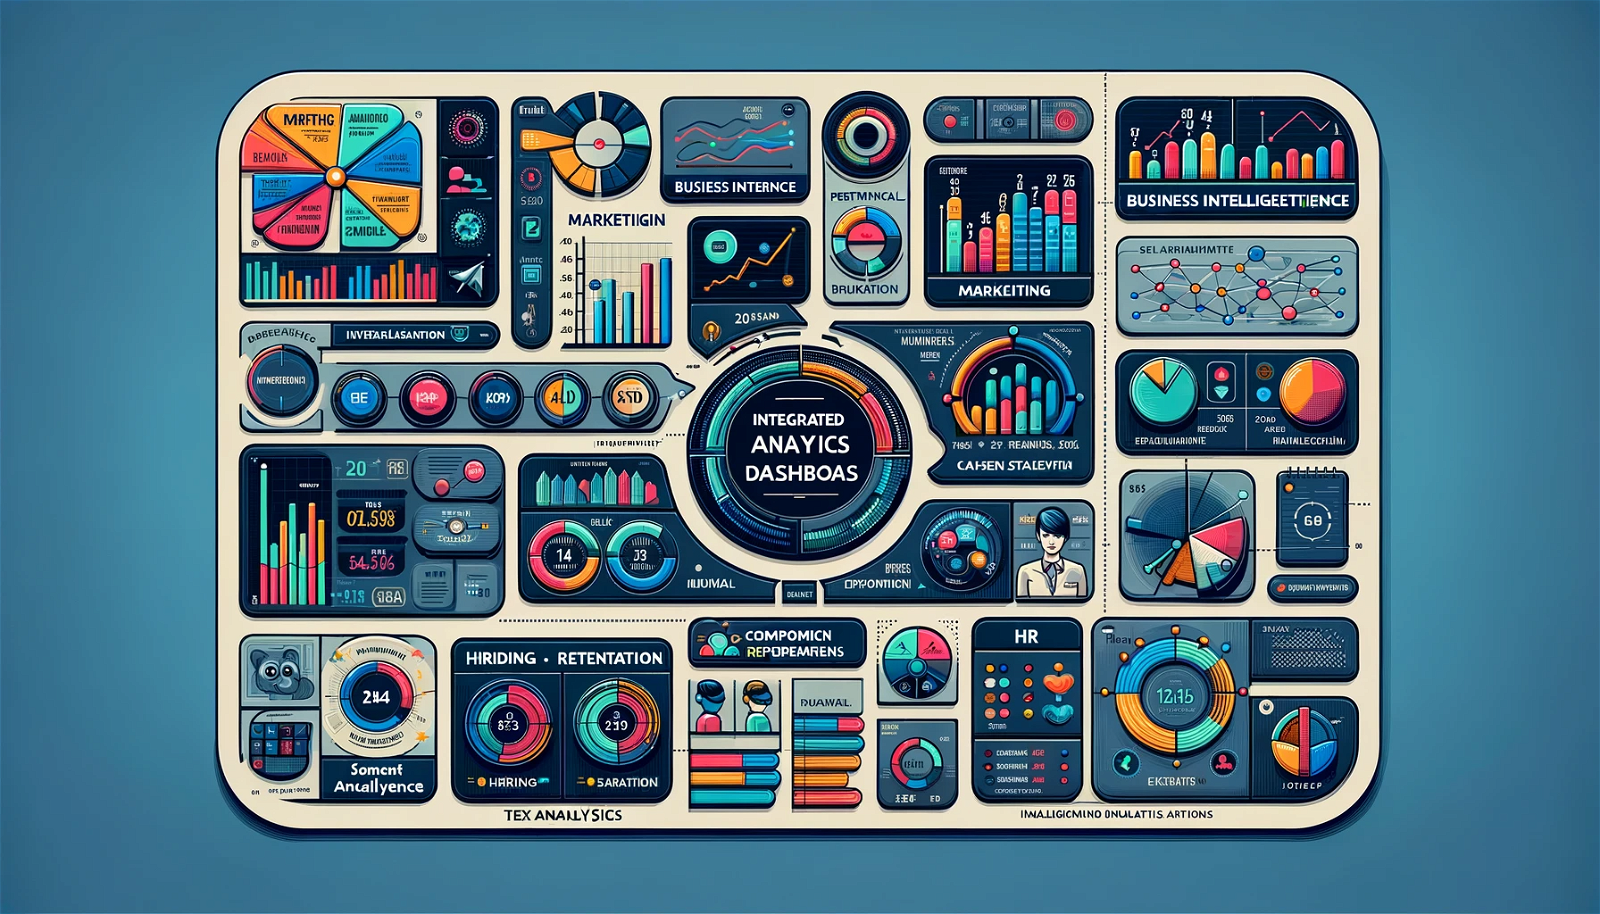 An integrated analytics dashboard combining elements from various types of dashboards_ Business Intelligence, Financial, Marketing, and HR. 